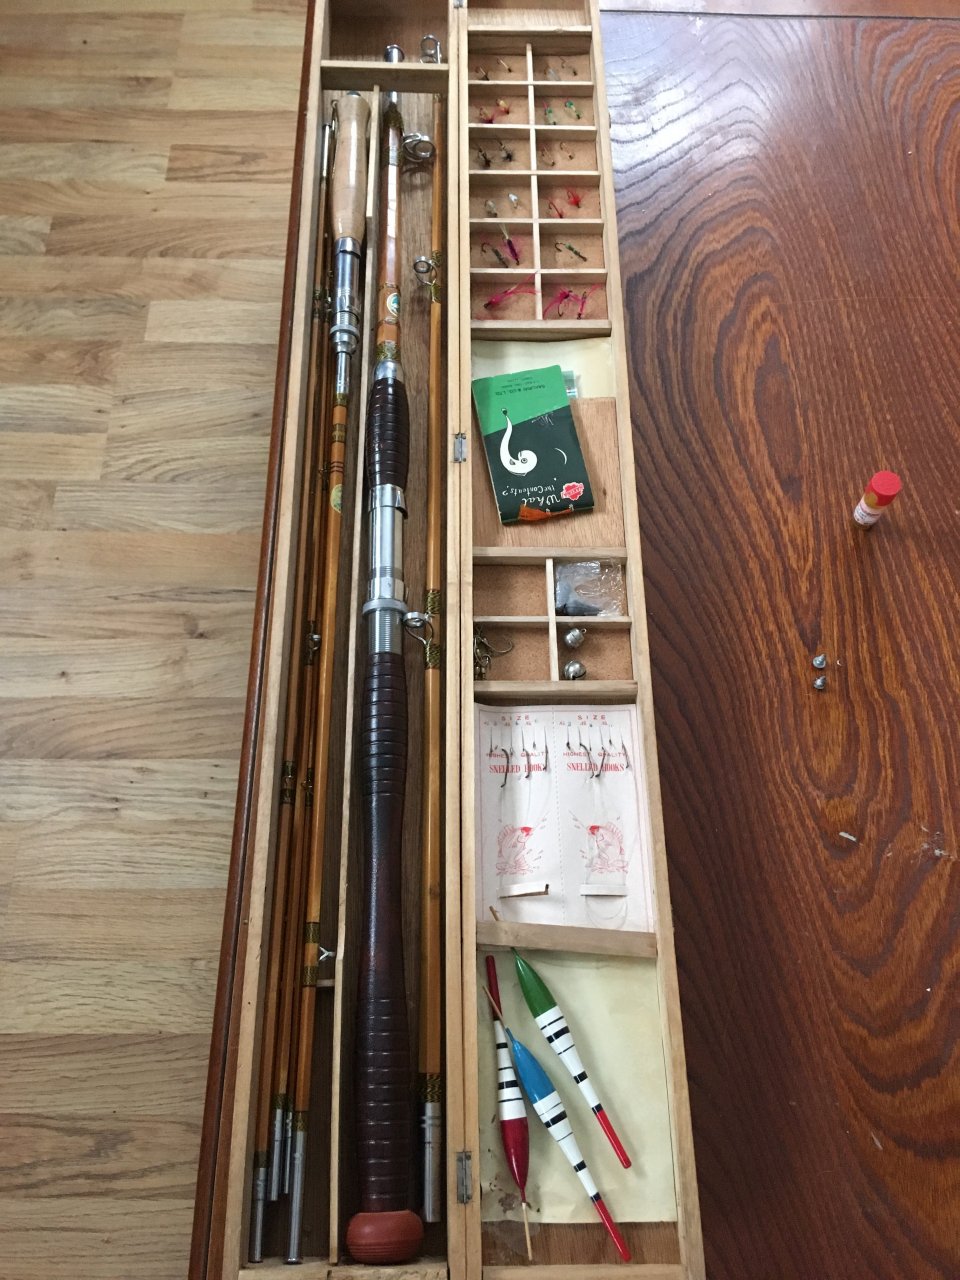 Mermaid Split Bamboo Rod Set In Box Appears To Have All Original Gear That